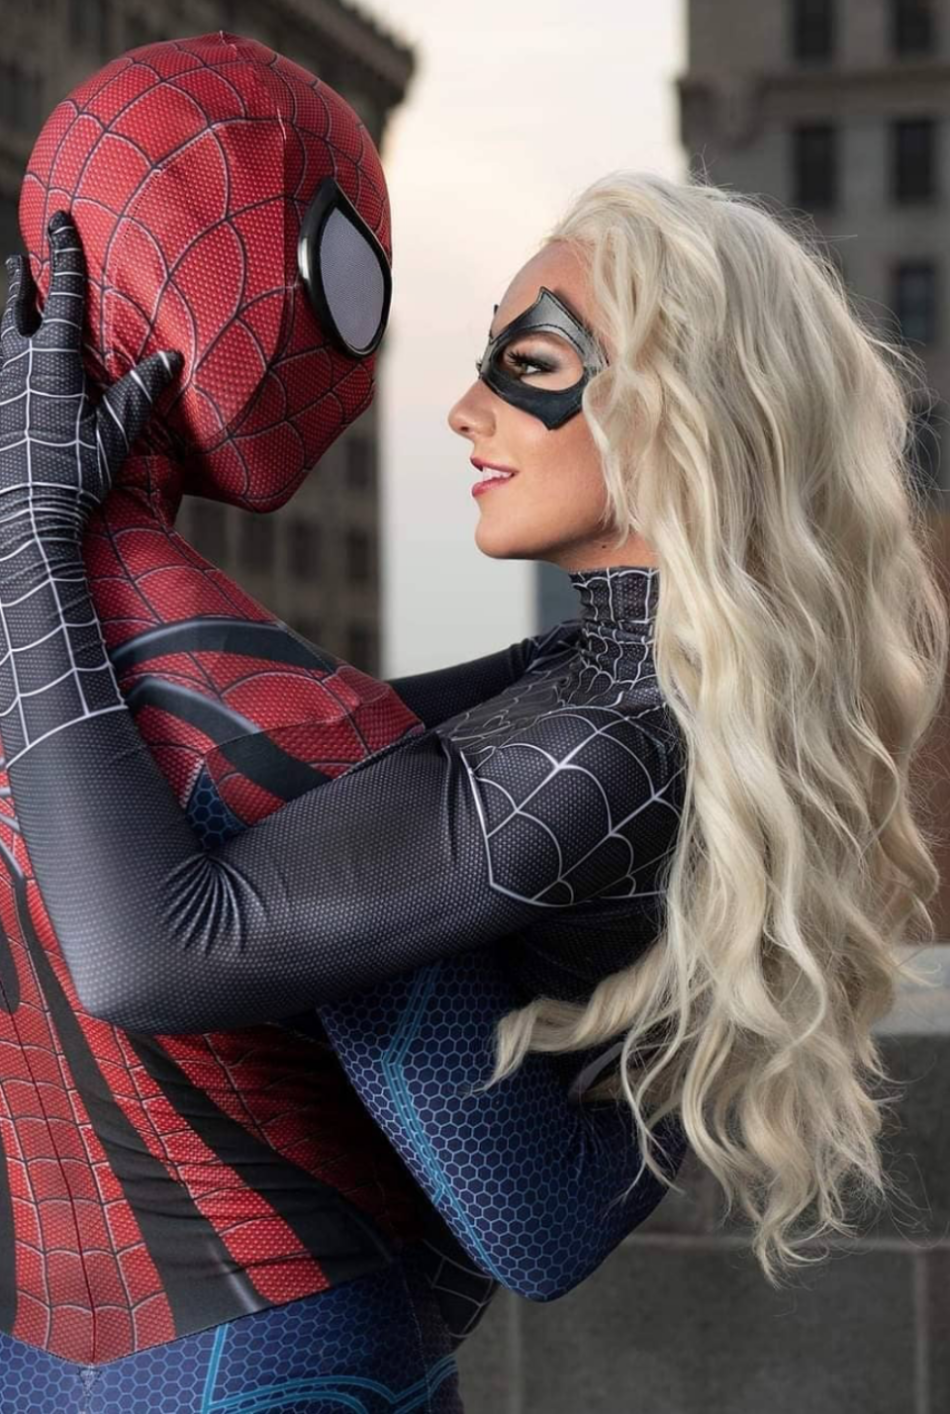 Sexy Red Hot Cosplay Girls Spiderman Women Best Photo Compilation 2021 (89 HQ Photos) 225